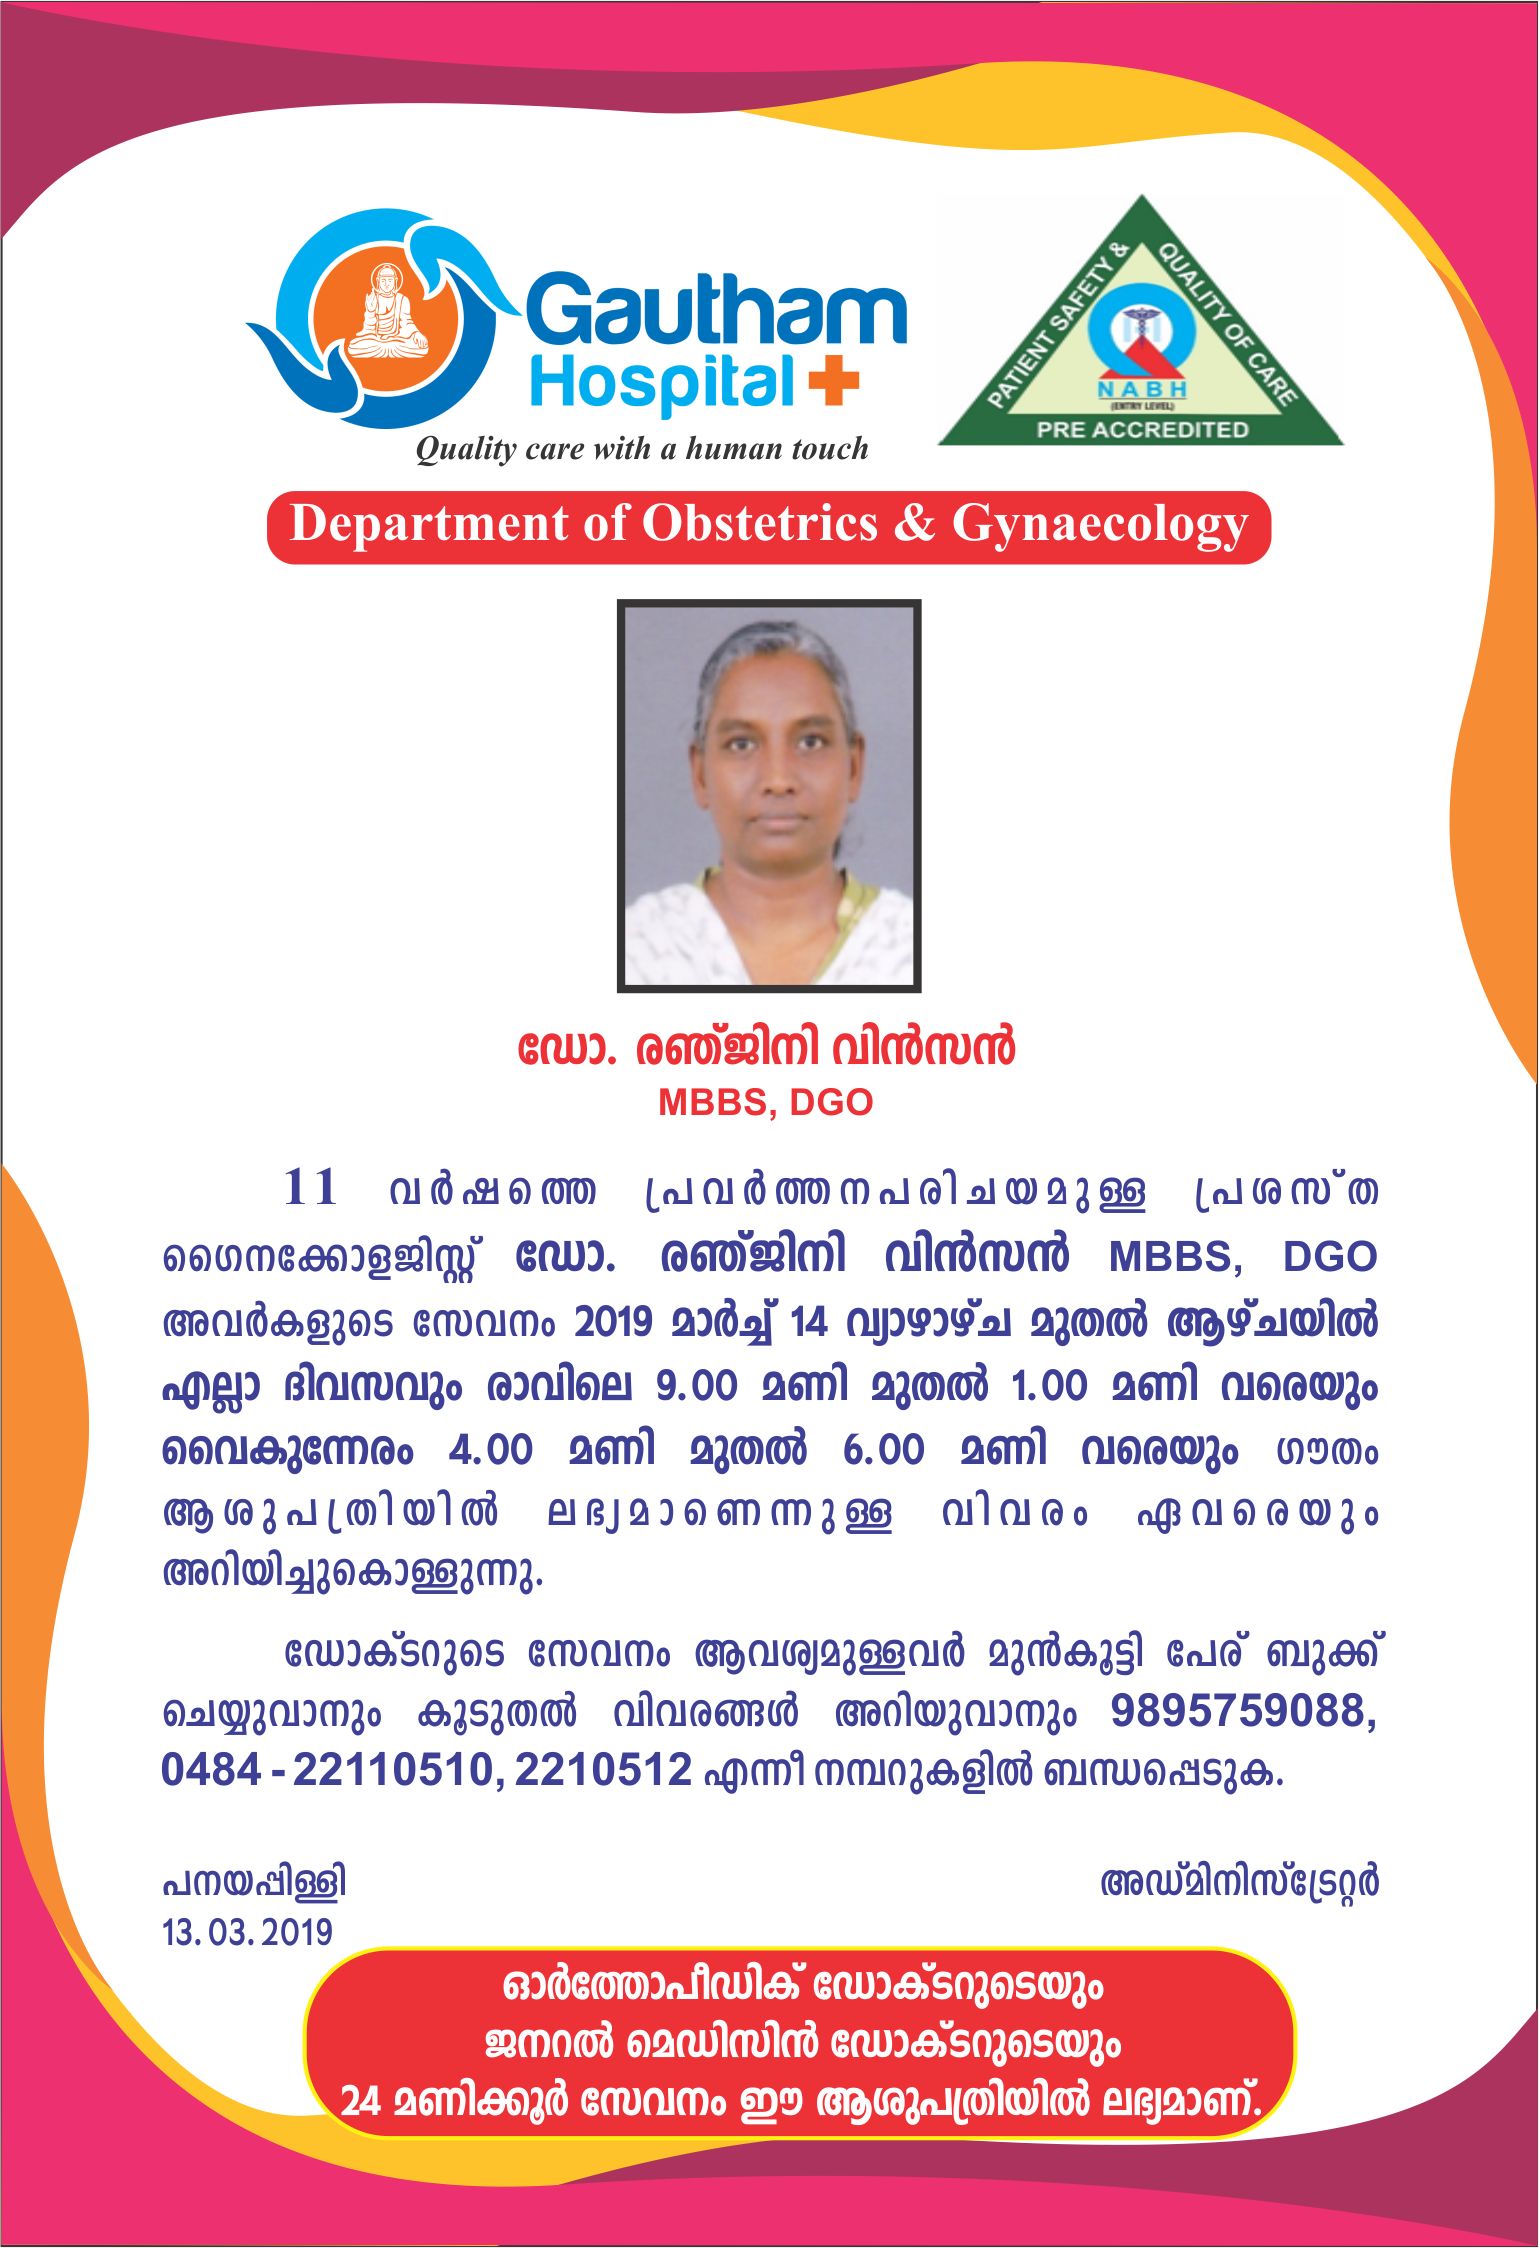 Gautham Hospital Welcomes Famous Gynecologist Dr.Renjini Winson.MBBS,DGO